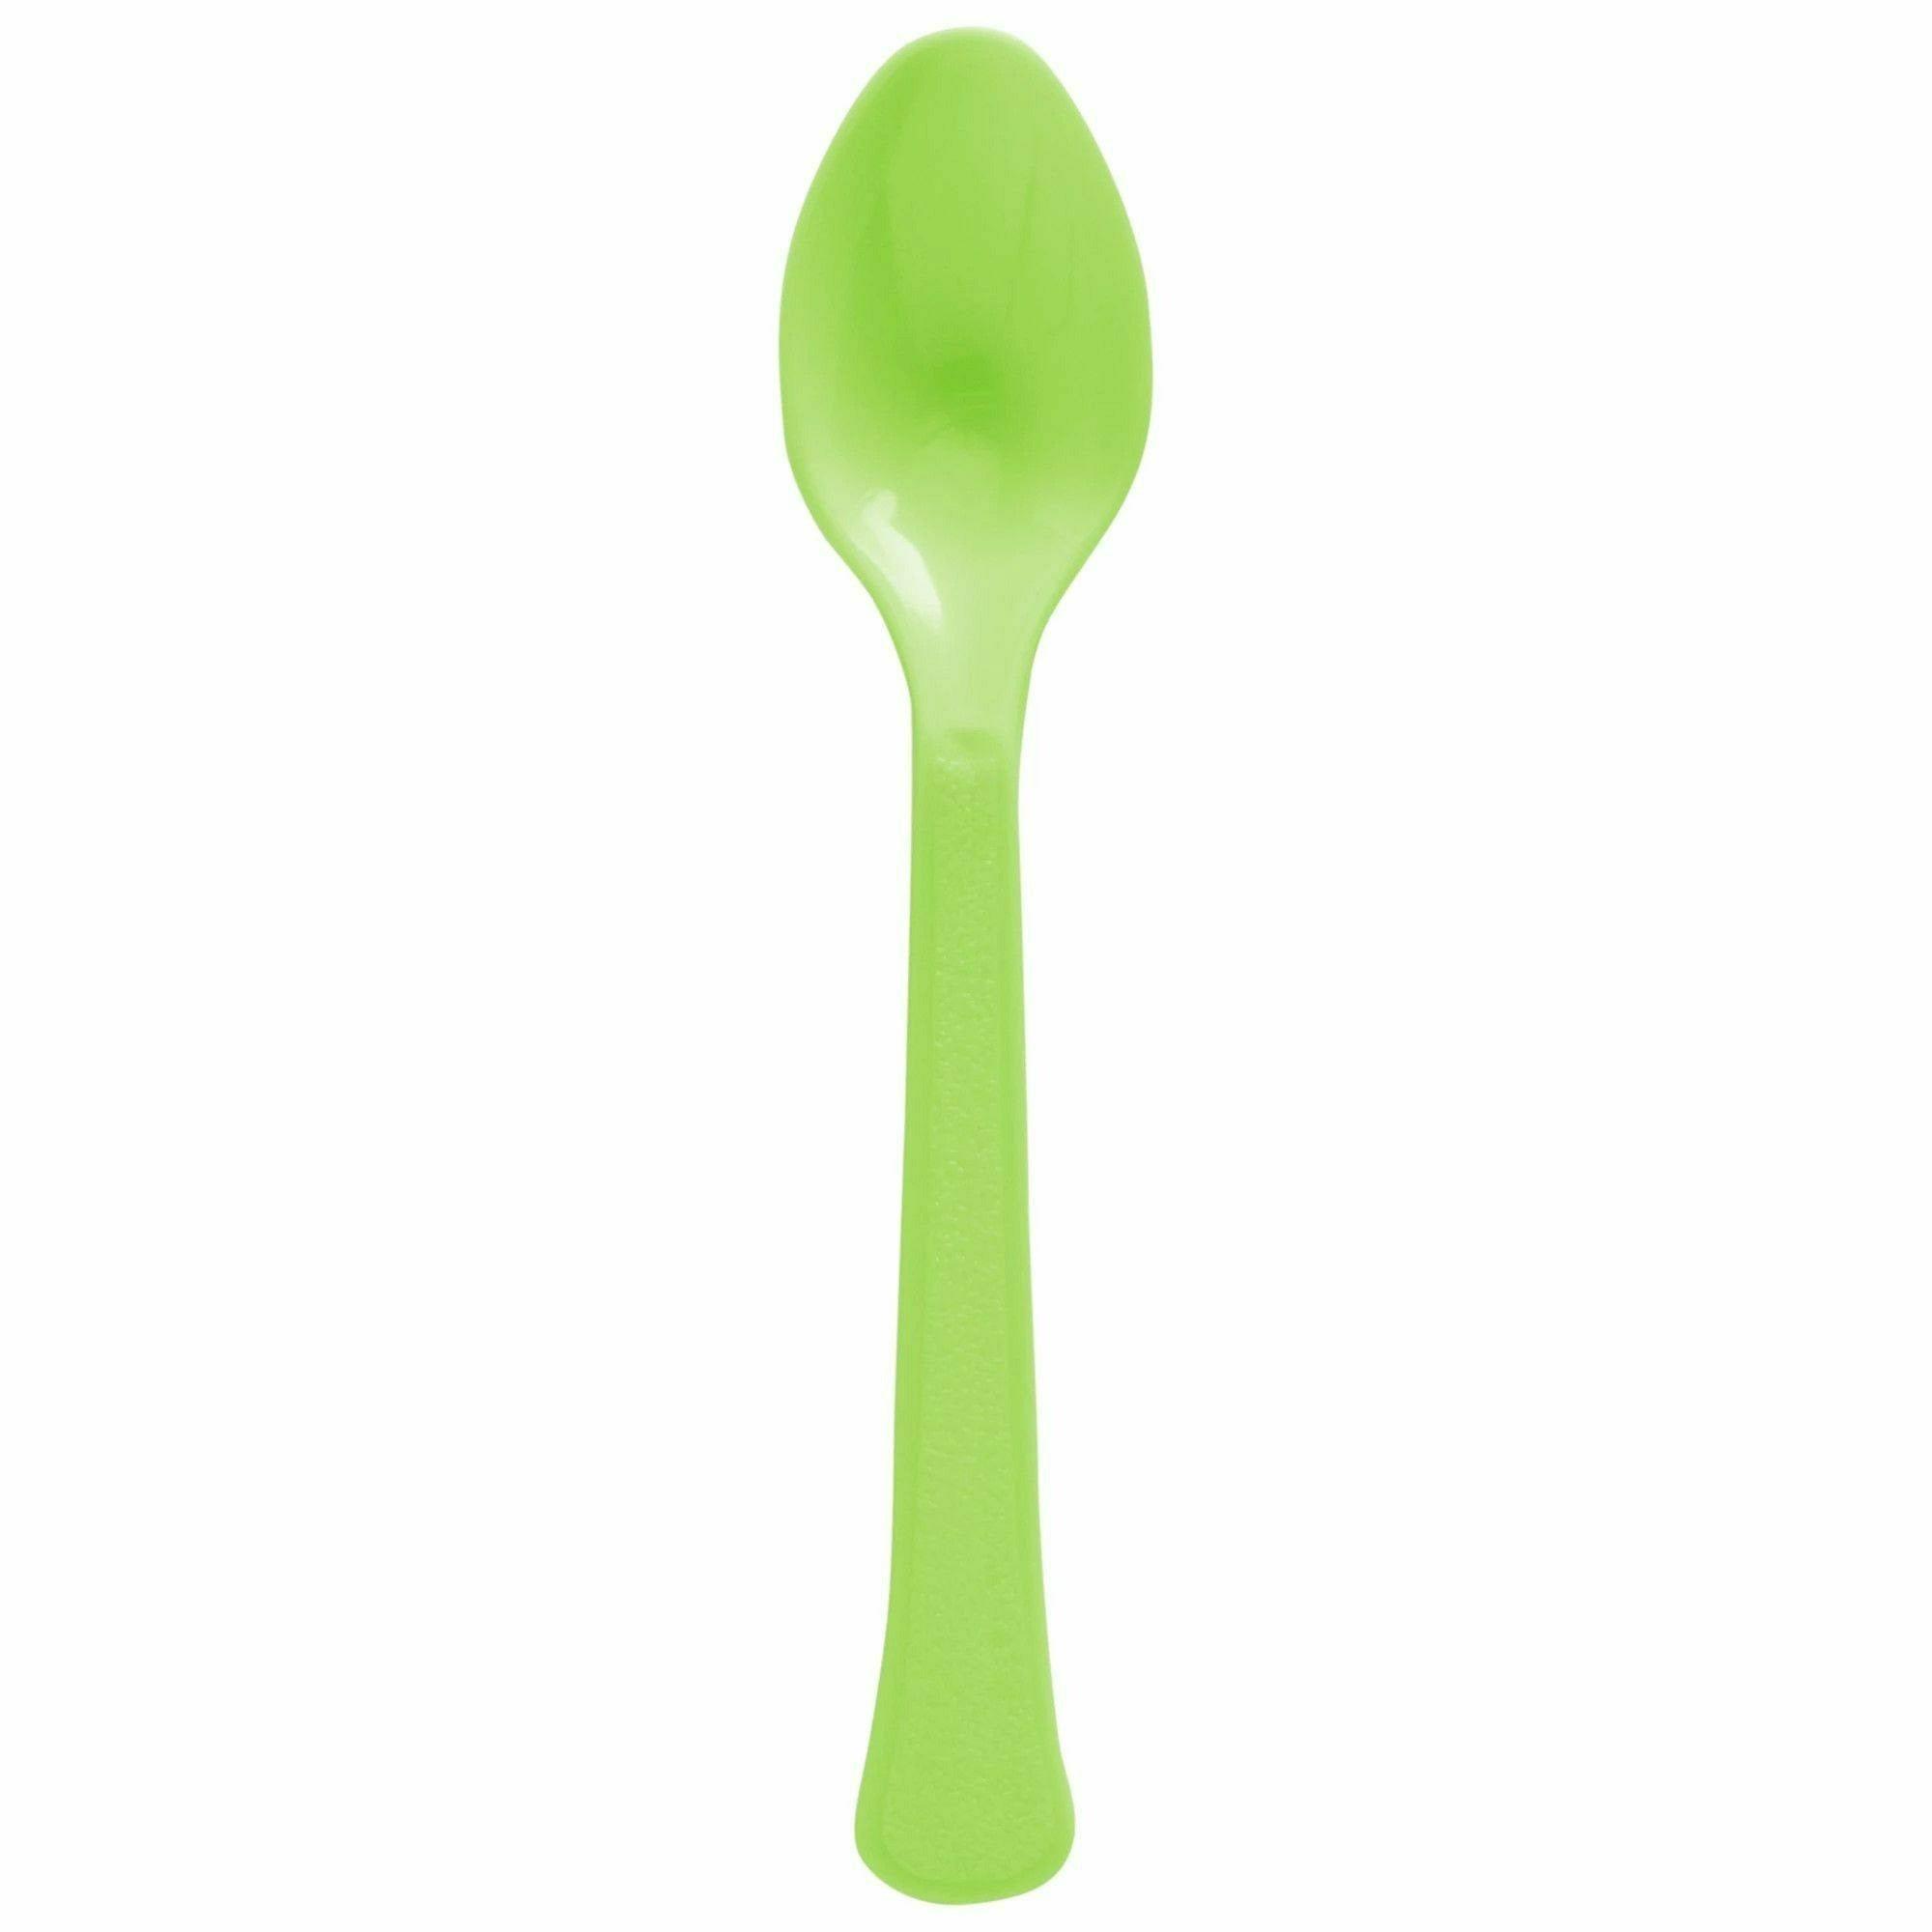 Amscan BASIC Kiwi - Boxed, Heavy Weight Spoons, 20 Ct.